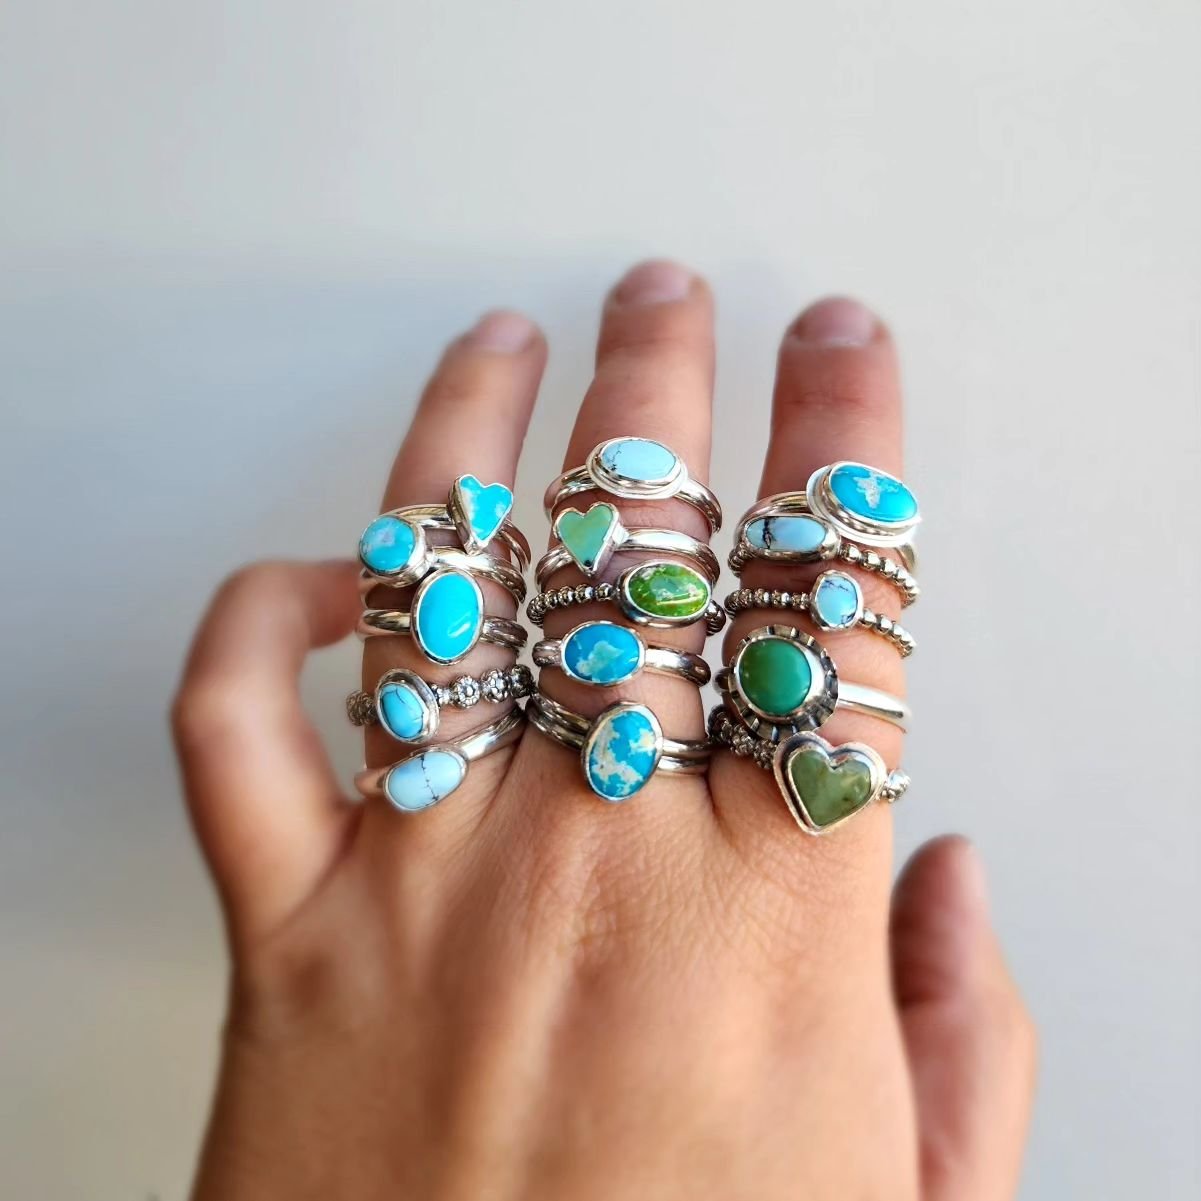 A whole batch of adorable stacking rings! Who needs one? (Everyone, everyone needs at least one!)

Available to newsletter subscribers next week, June 6th, and to the public on June 7th. Which one do you like the most??